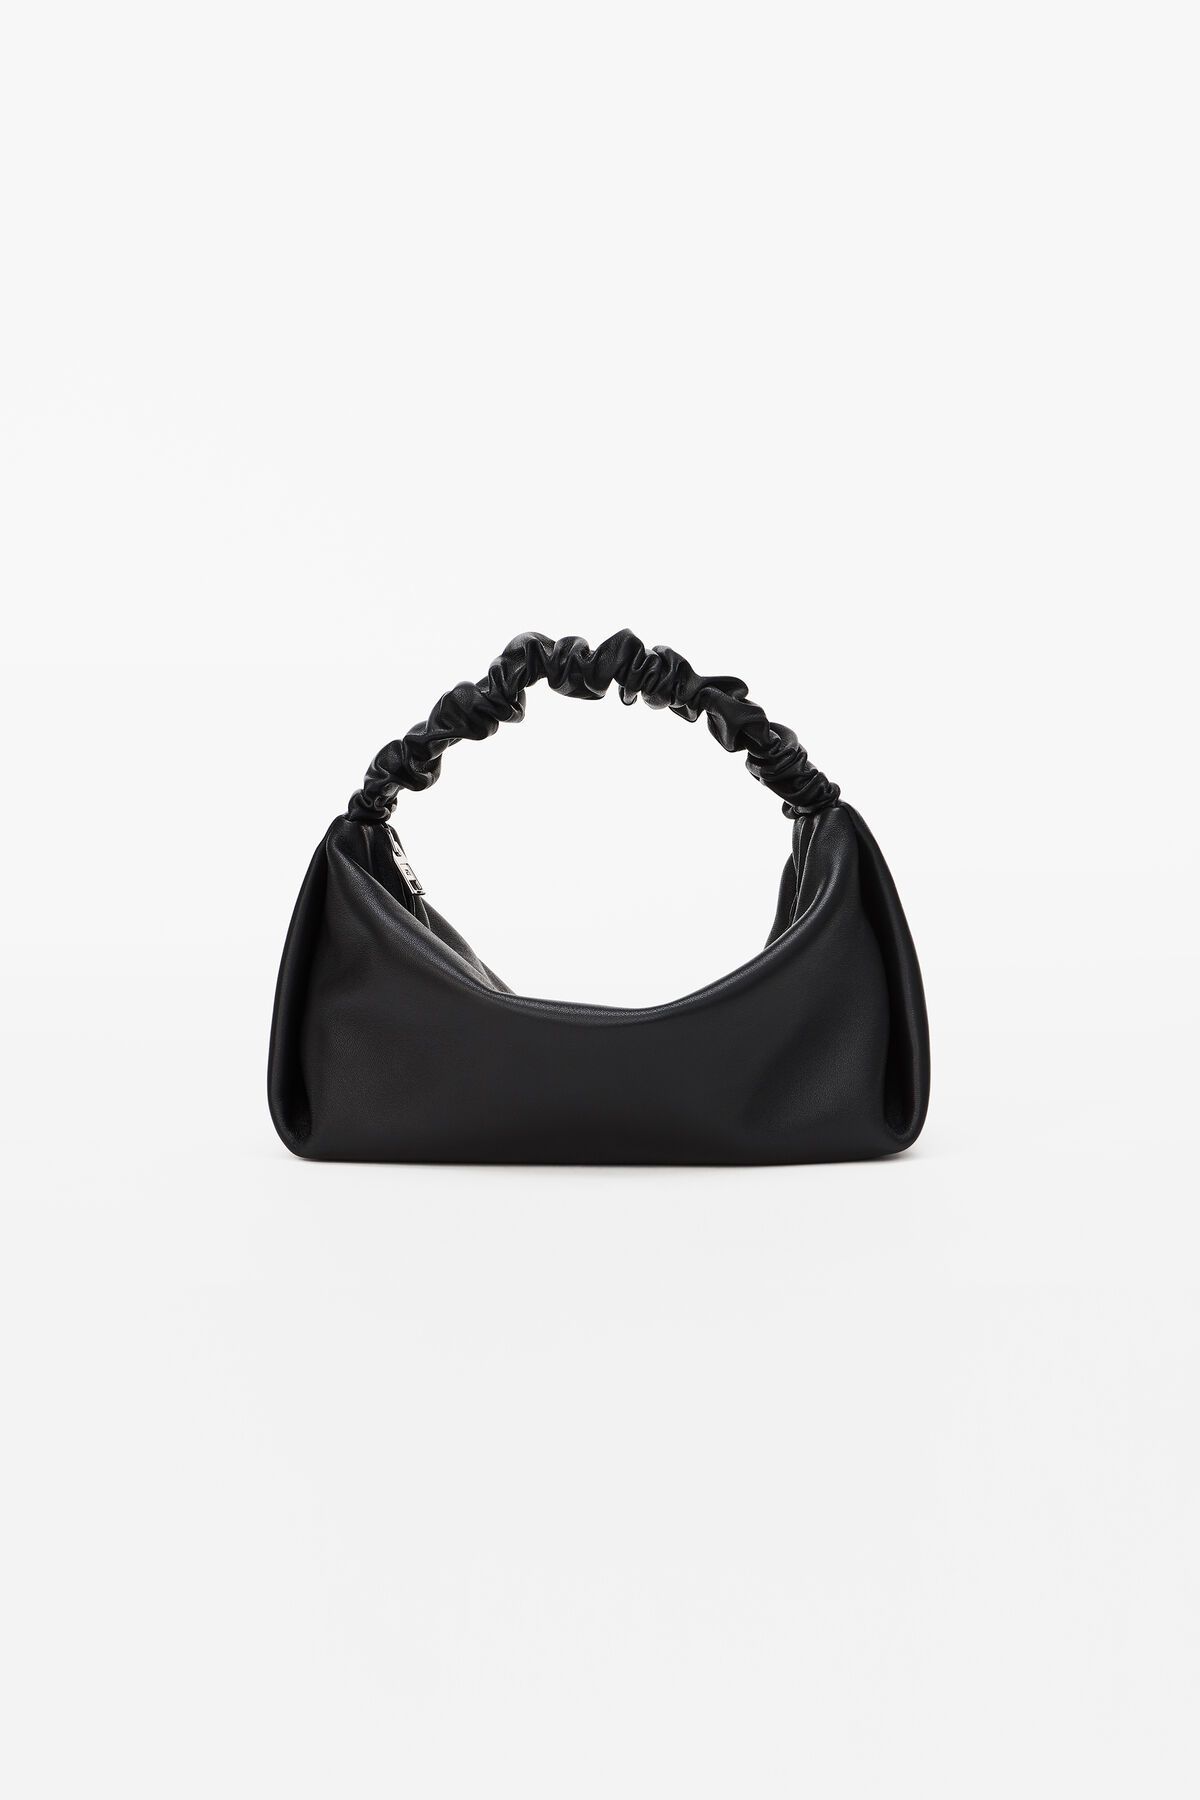 SCRUNCHIE SMALL BAG IN NAPPA LEATHER | Alexander Wang